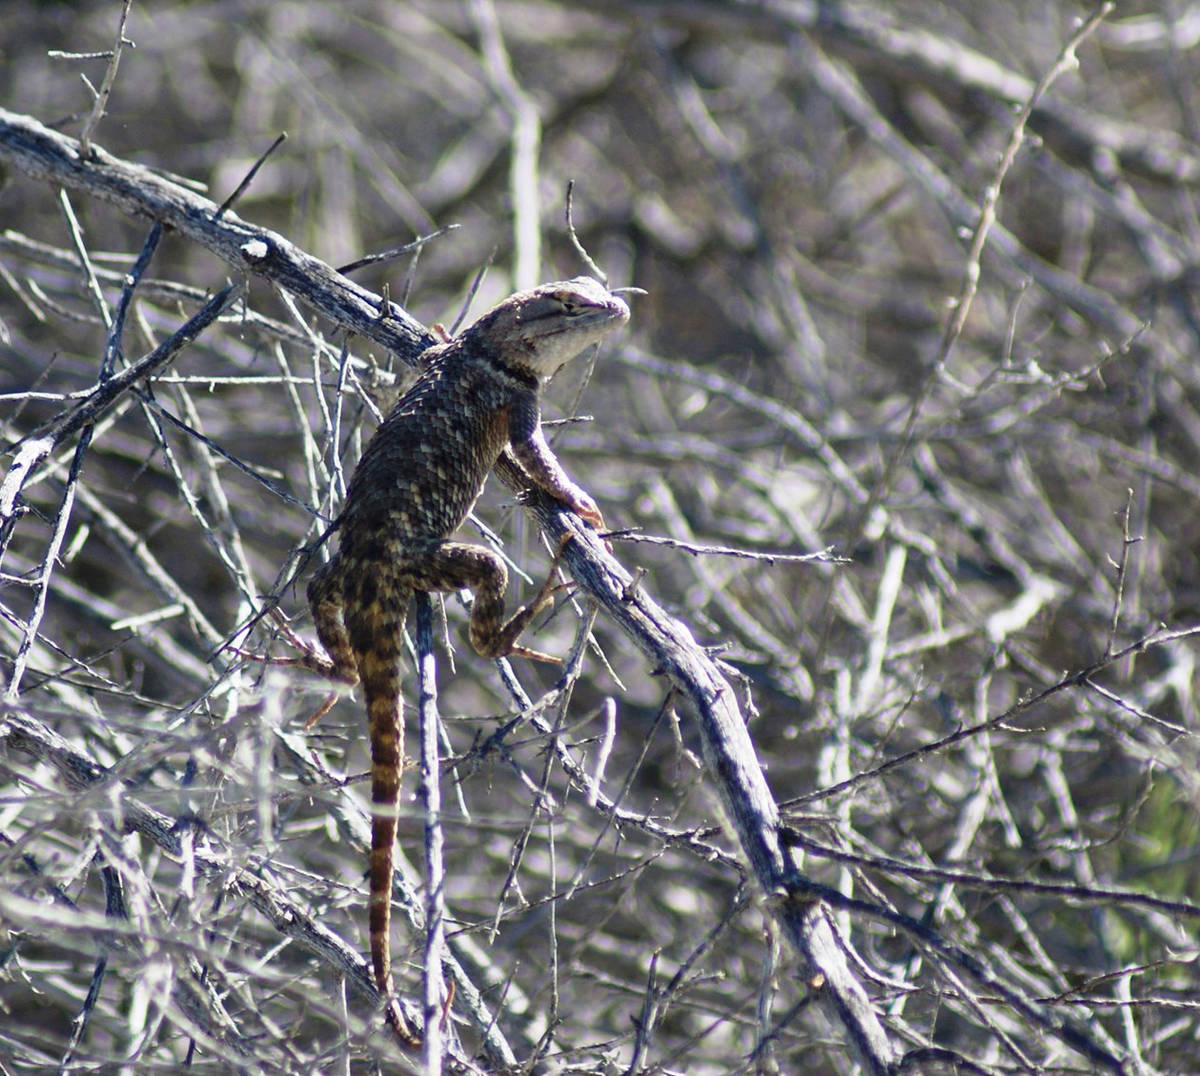 This yellow-backed spiny lizard perches to get a better view of the comings and goings at Corn ...